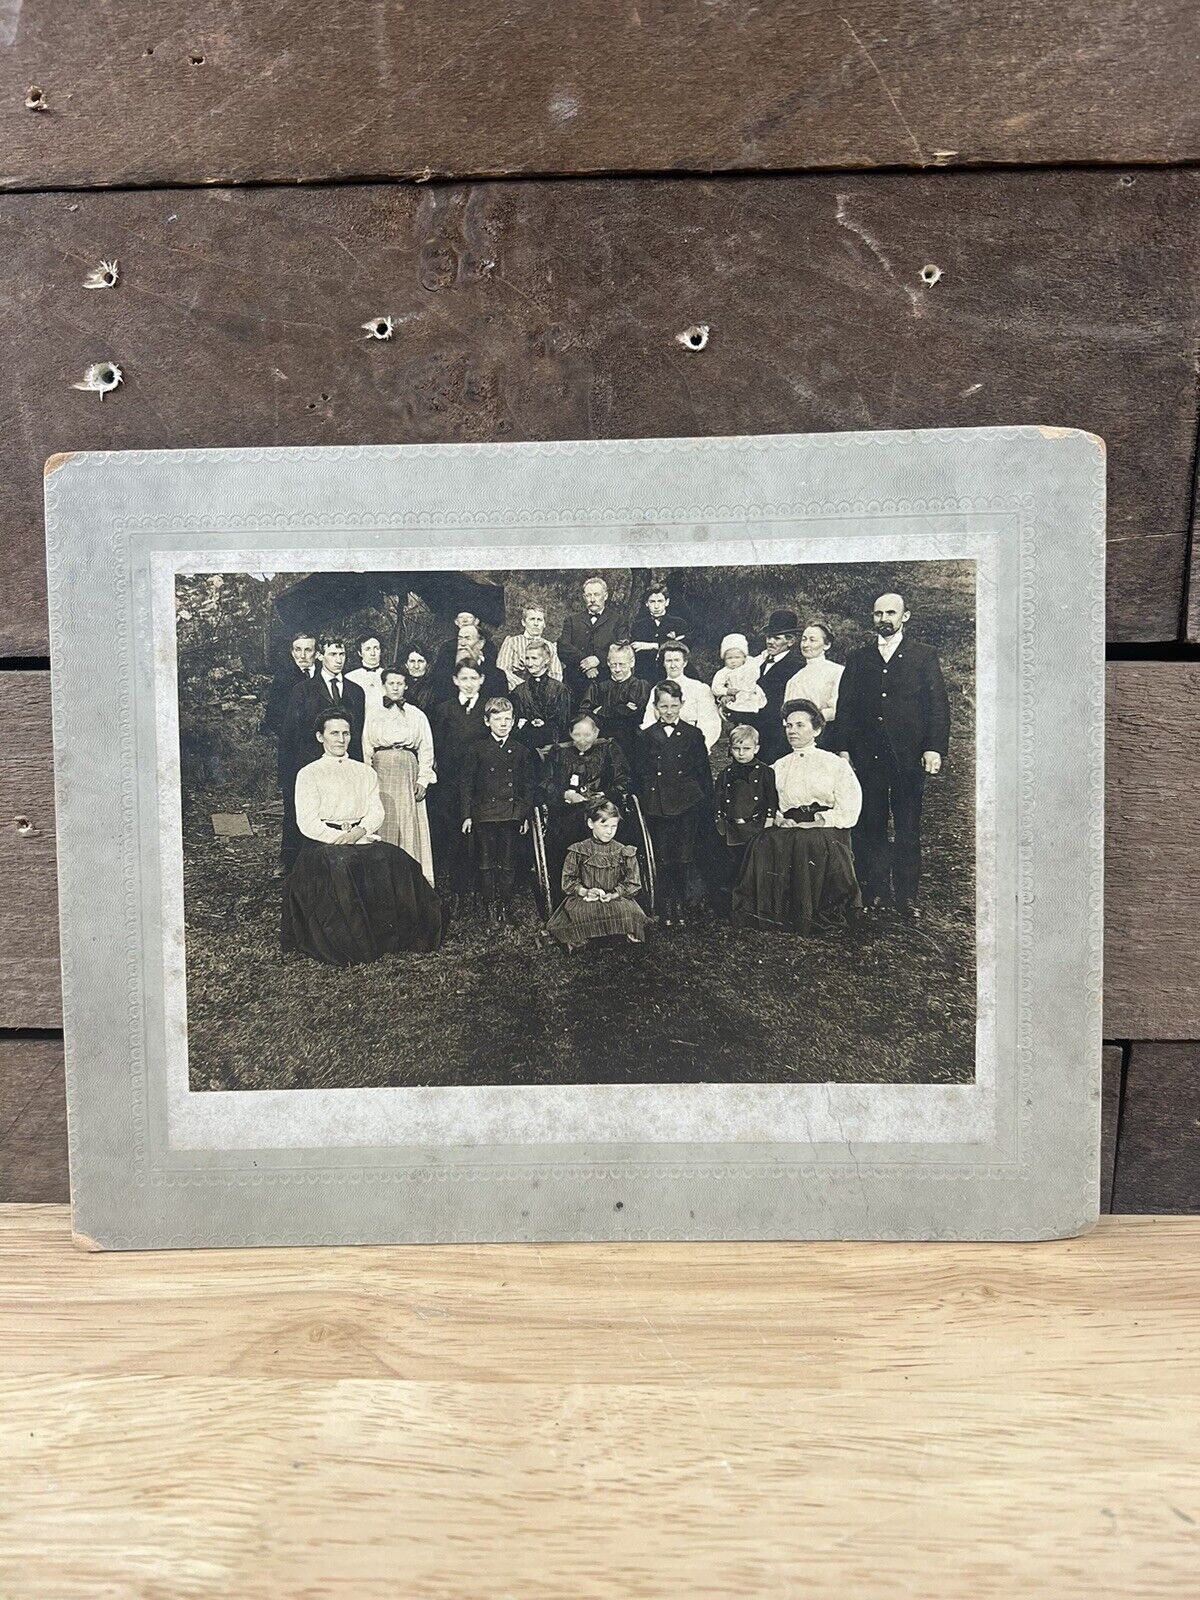 Antique Black And White Family Portrait Cardboard Photograph Blurred Faces